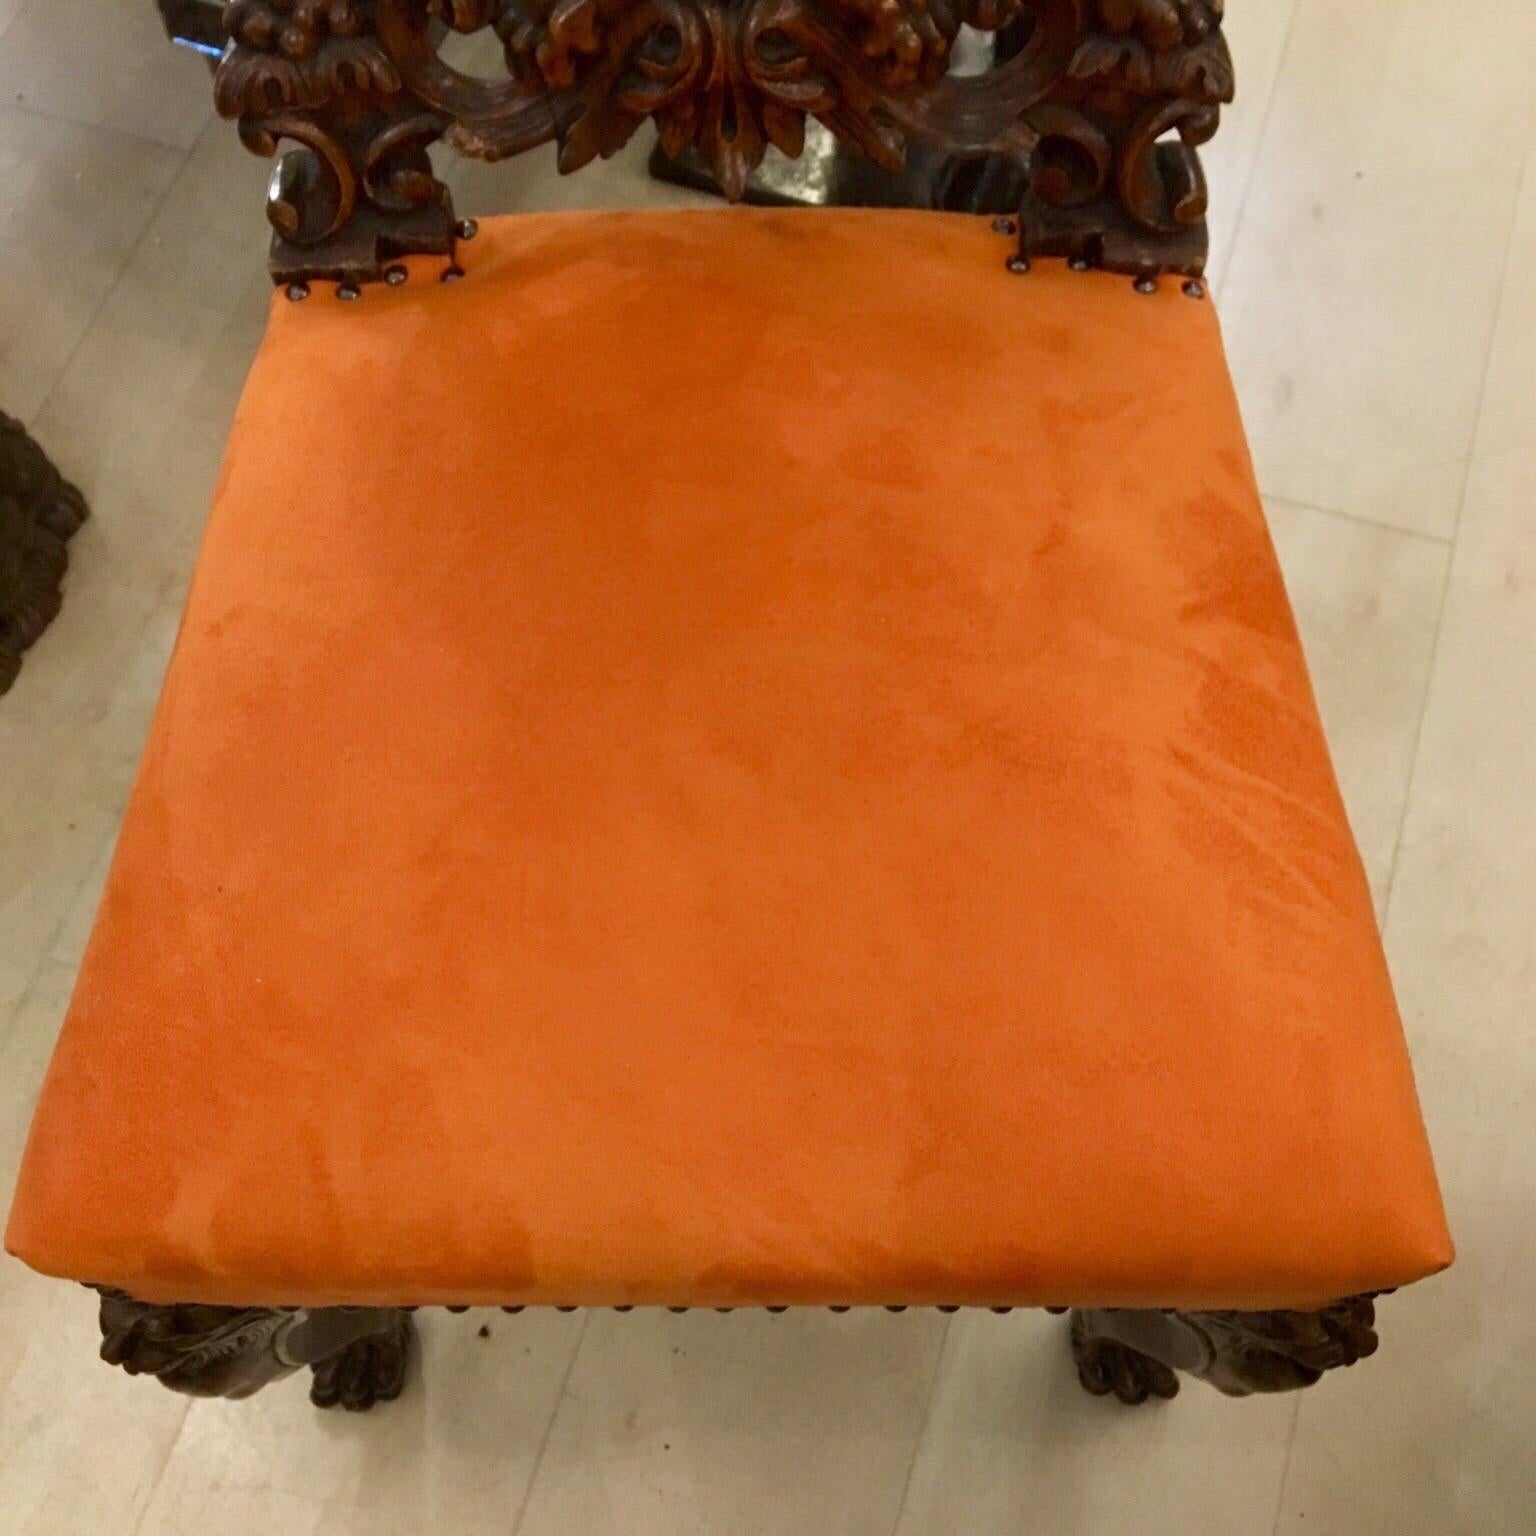 Pair of Carved Renaissance-Style Wooden Chairs Orange Alcantara Seat, Early 1900 10